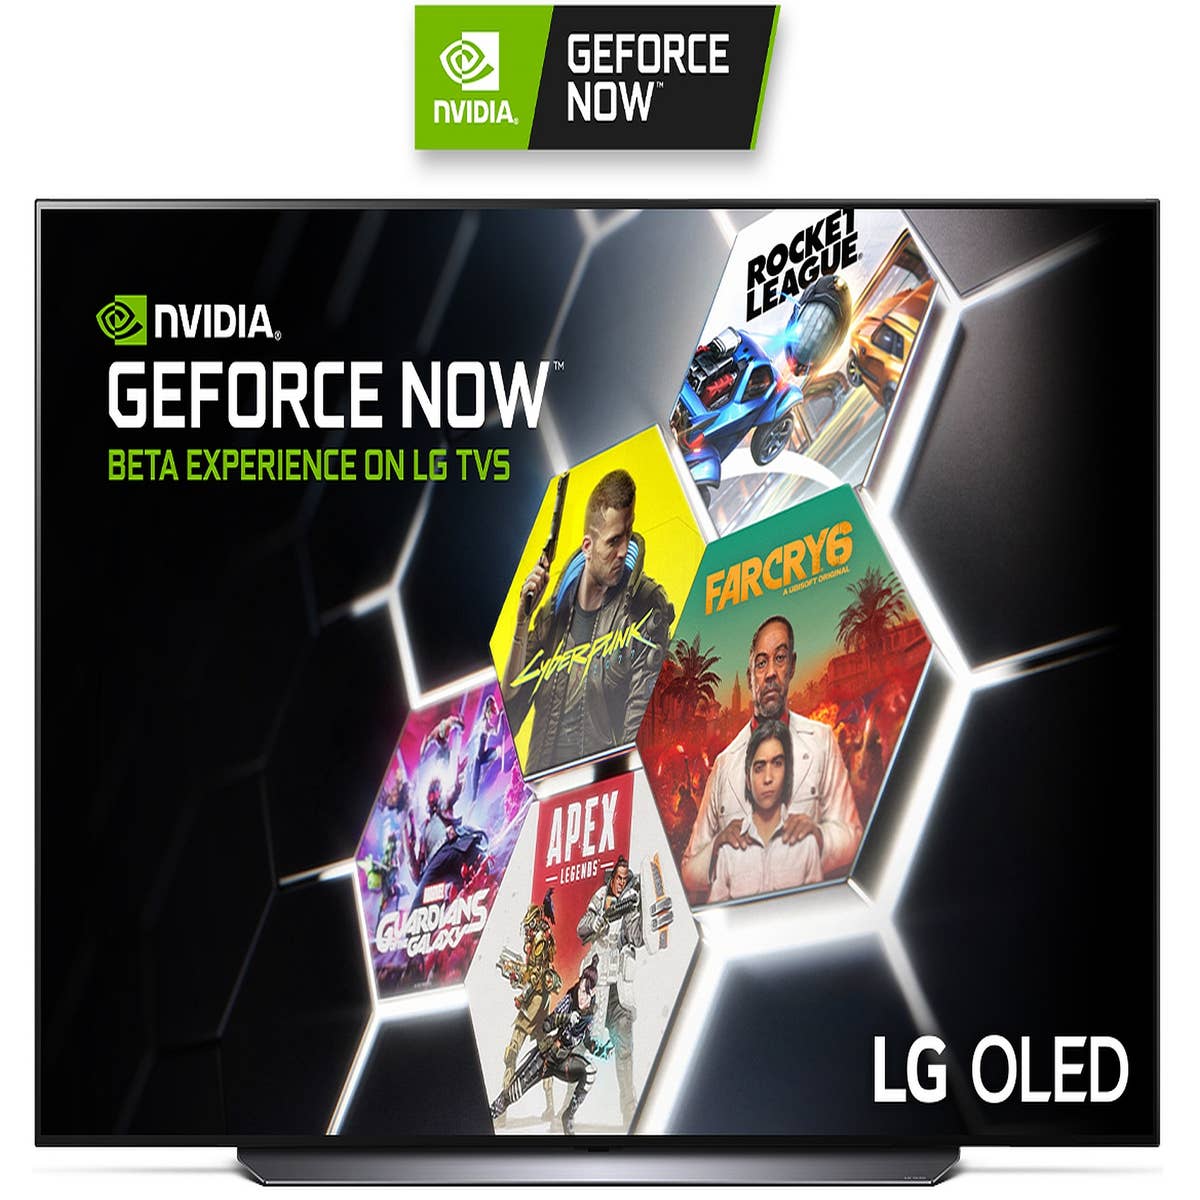 PLAYSTATION NO GEFORCE NOW 